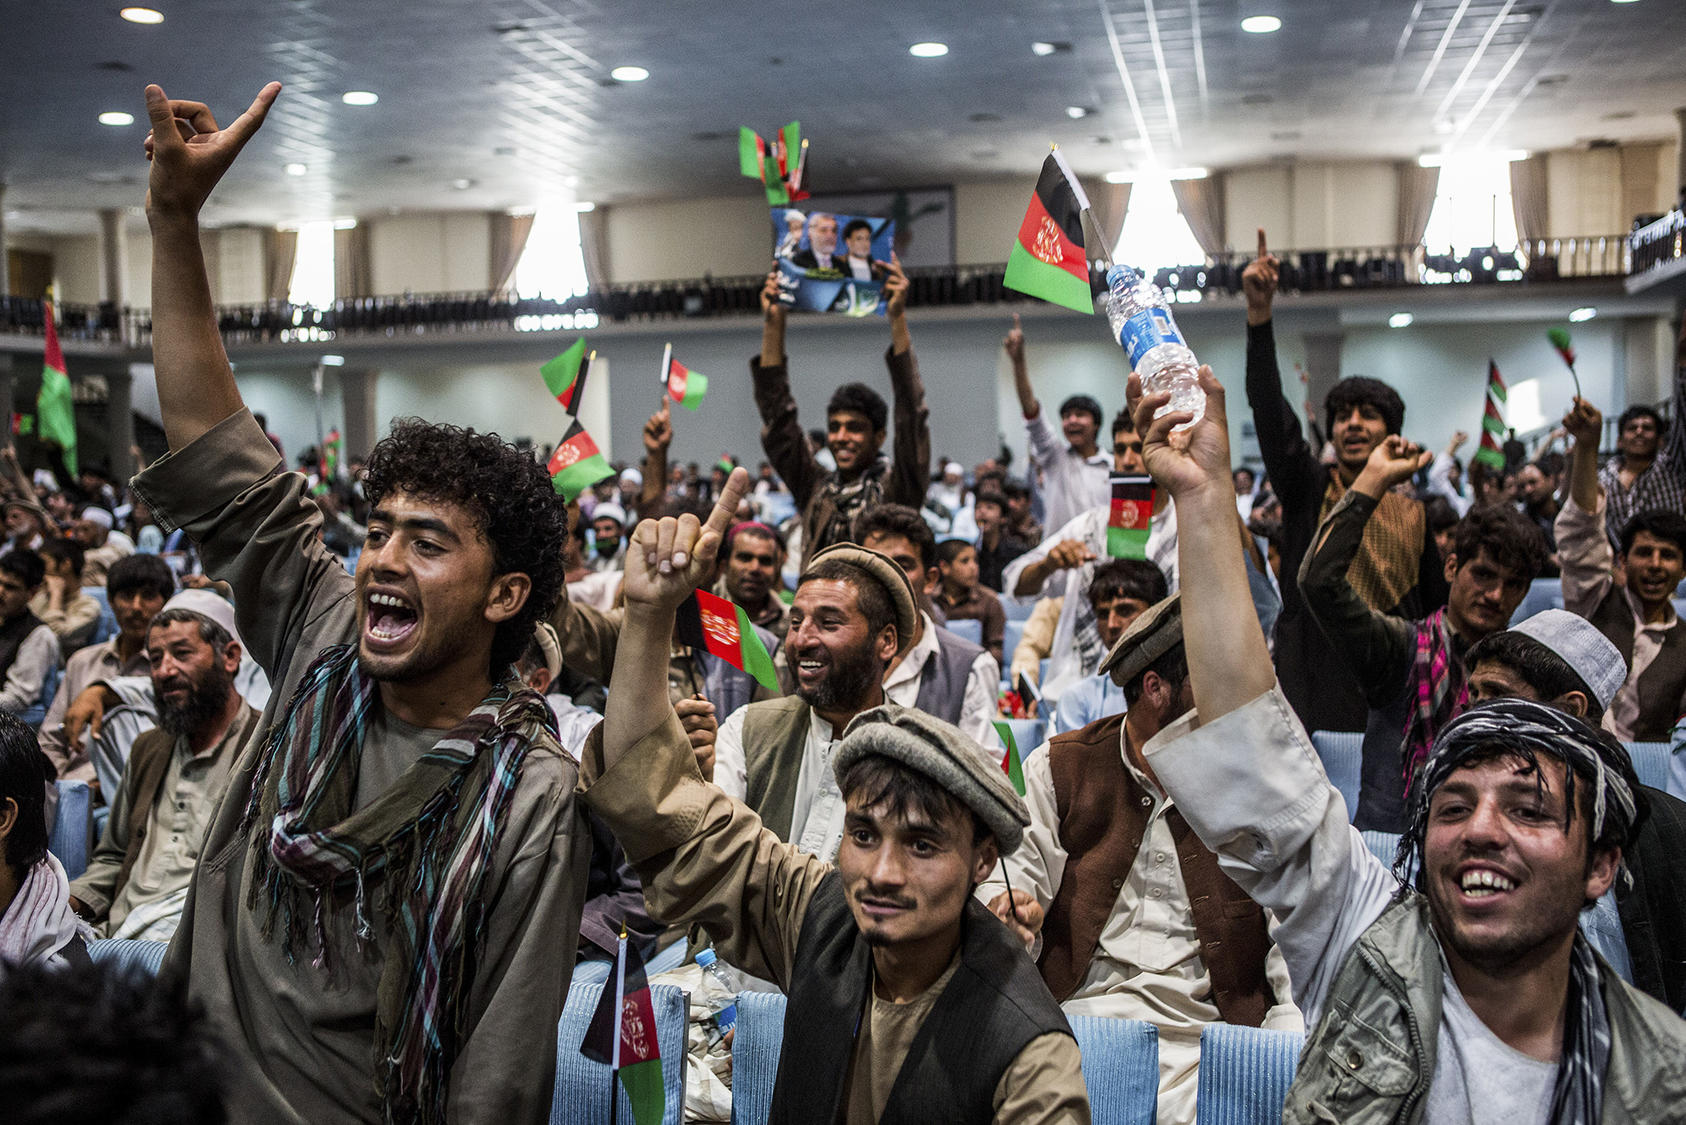 Afghans attend a campaign rally in Kabul, Afghanistan. (Bryan Denton/The New York Times)